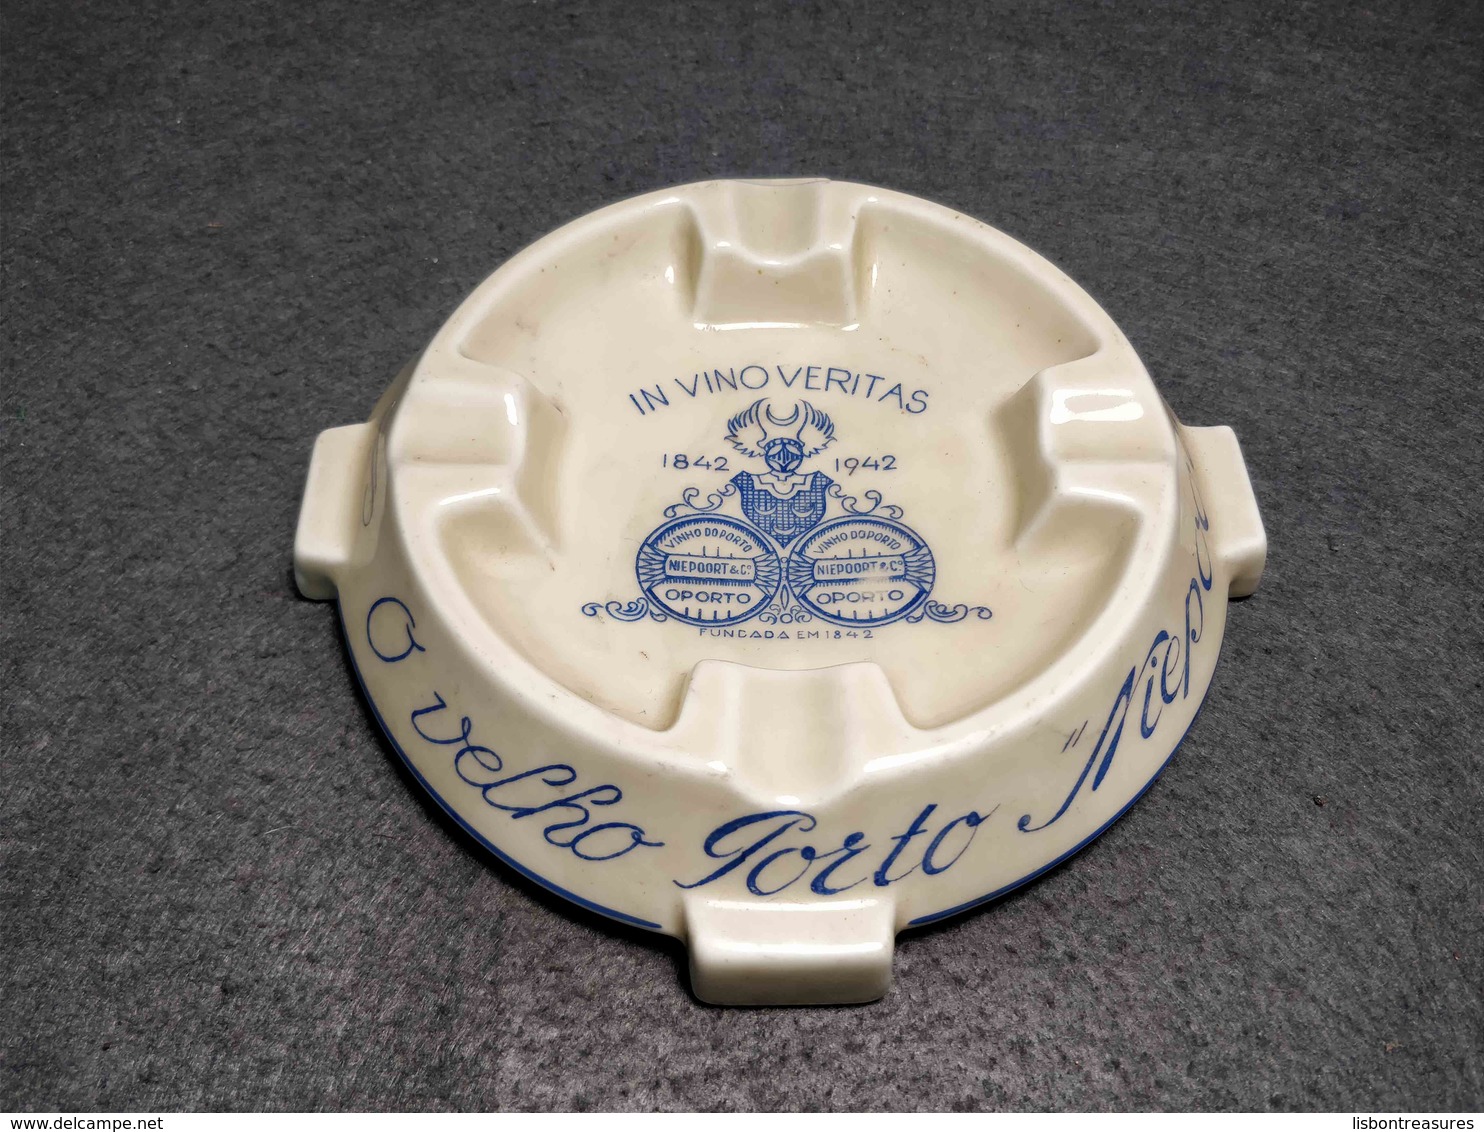 RARE VINTAGE PORCELAIN ASHTRAY ADVERTISING " NIEEPORT" PORT WINE MADE IN PORTUGAL BY CANDAL - Porcelain